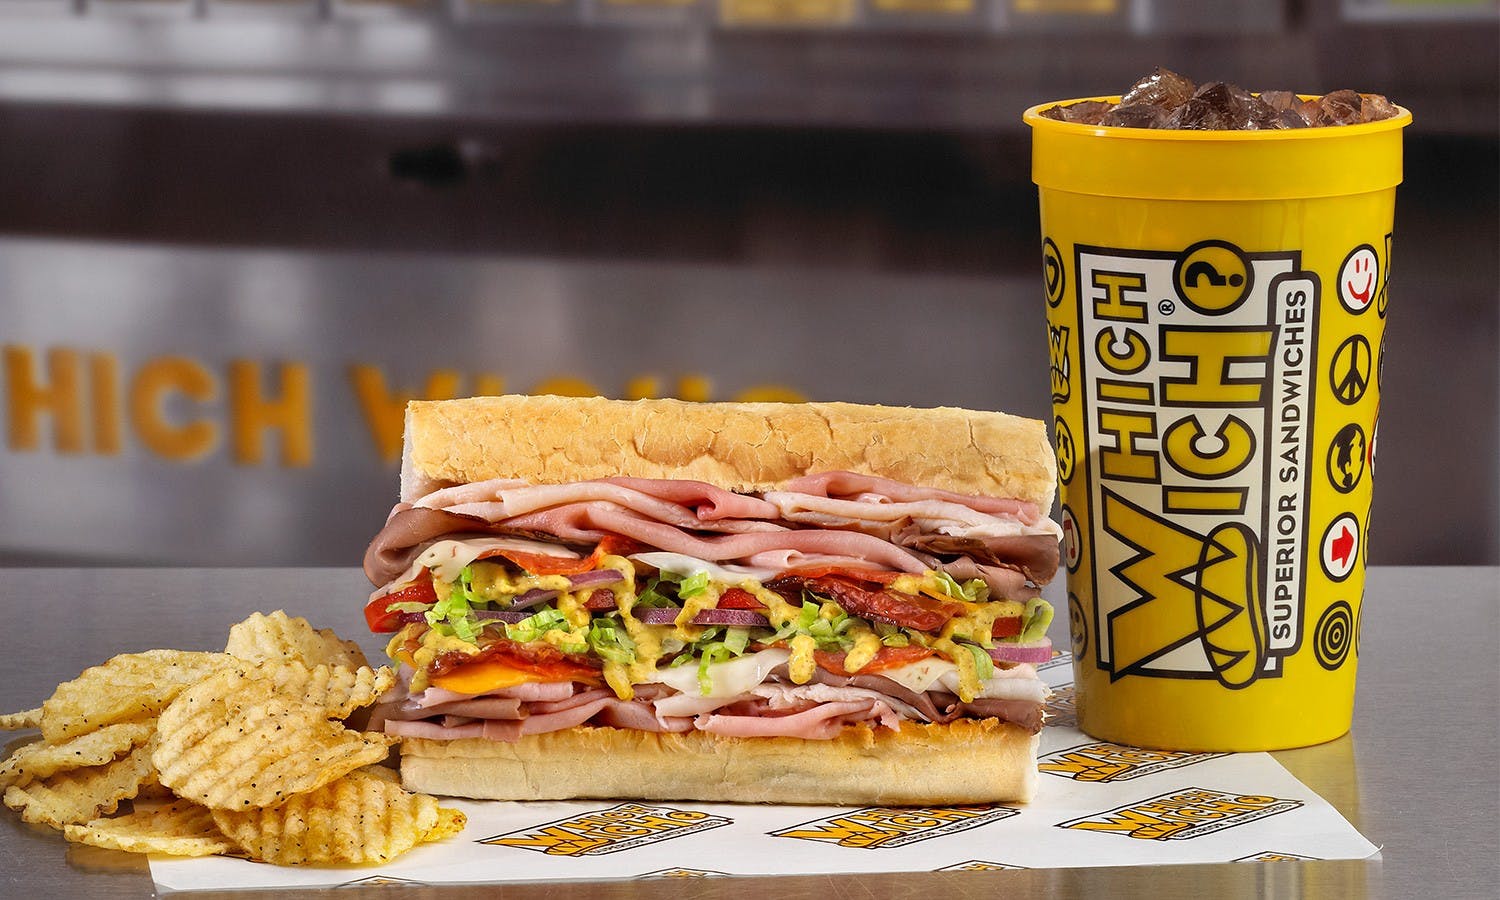 Which Wich - Towne Centre Dr. in San Diego - Highlight